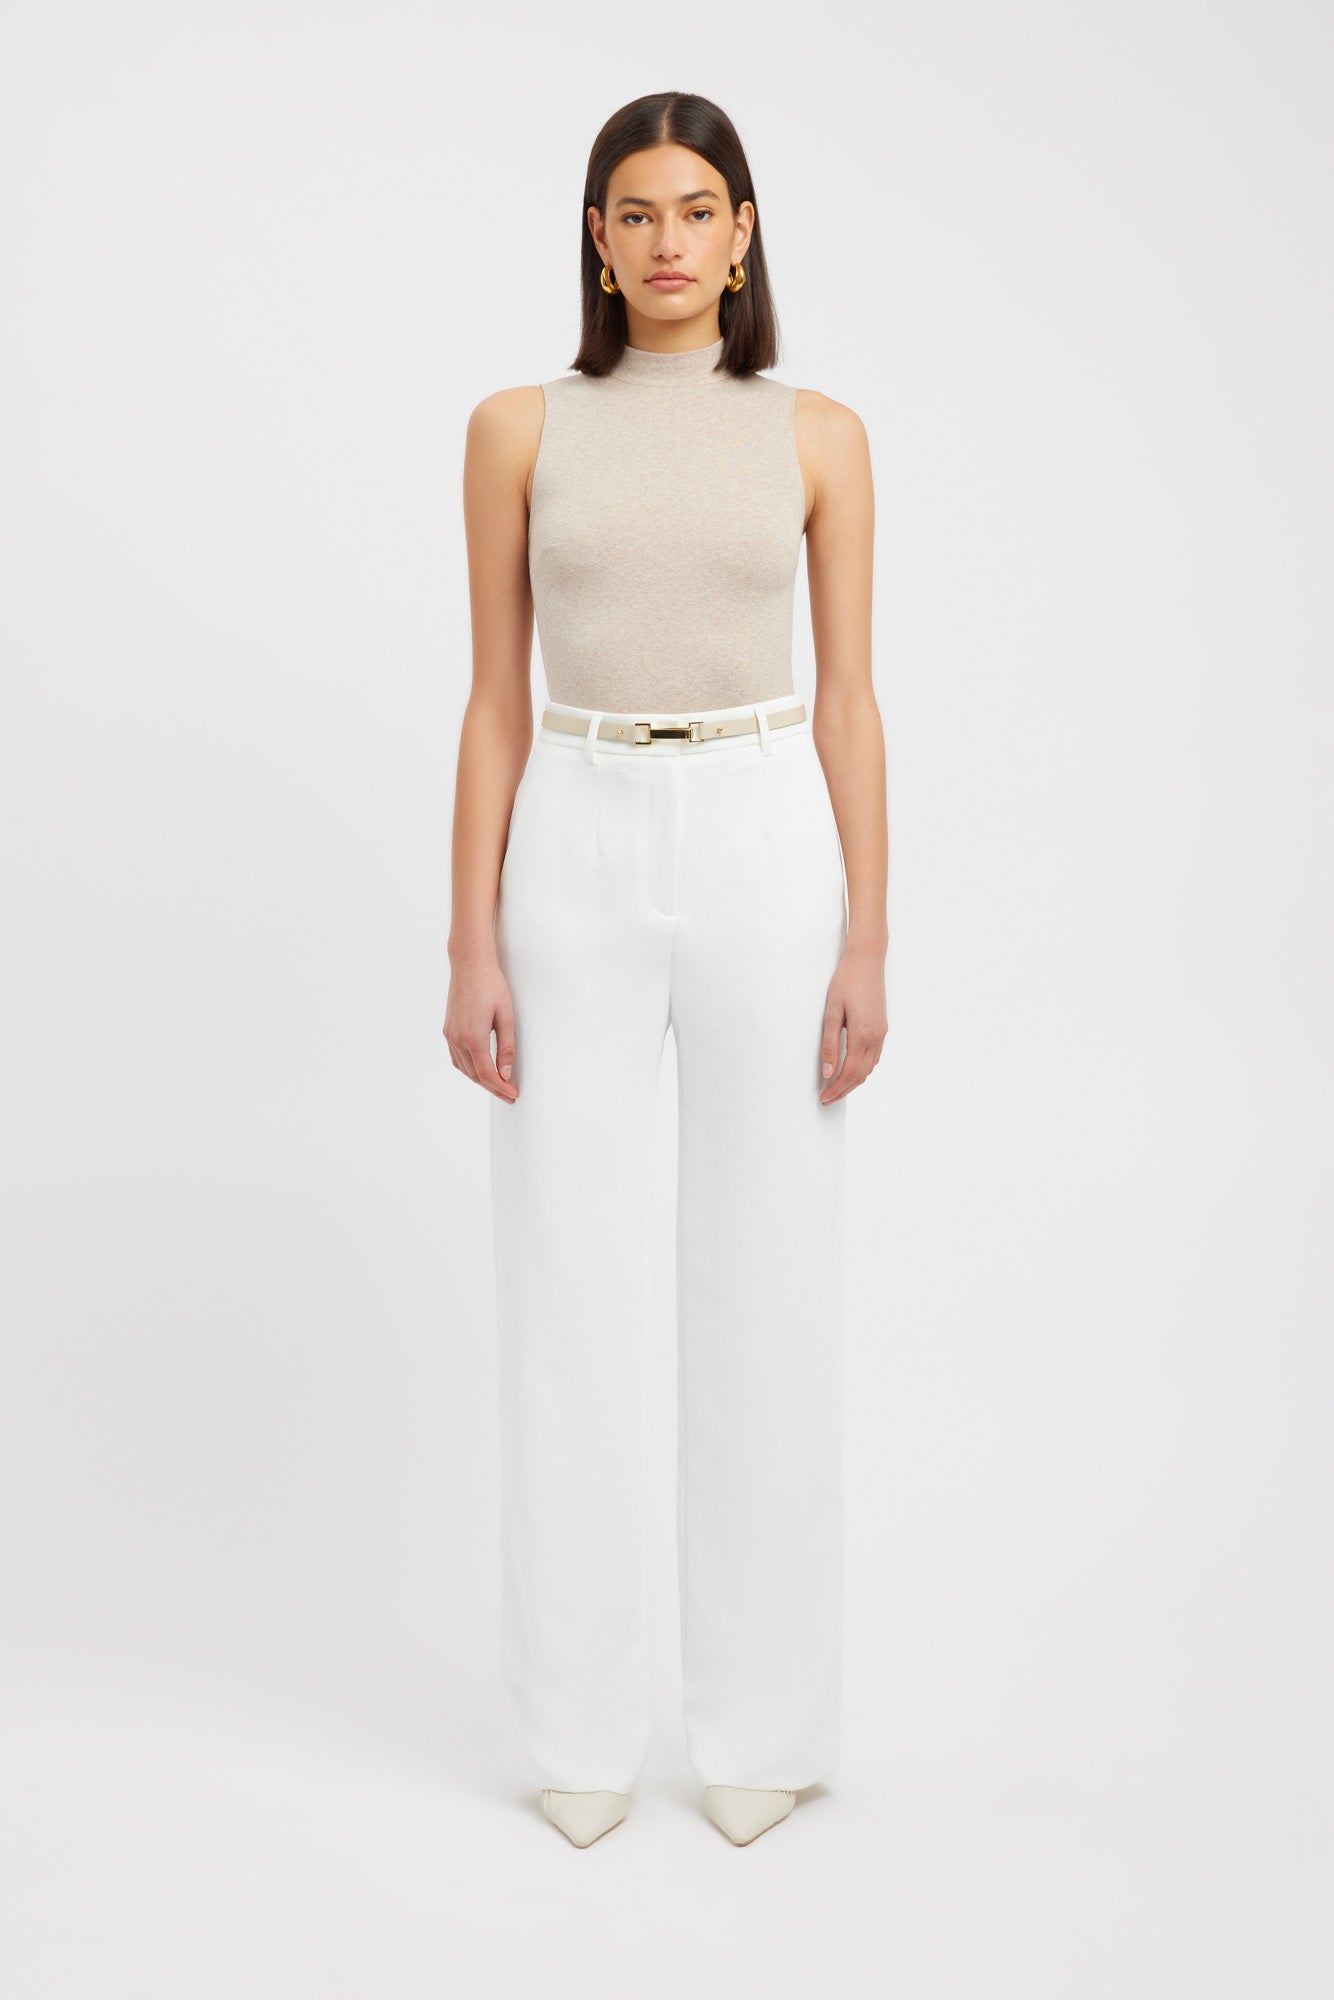 Buy Oyster Tailored Pant Natural White Online